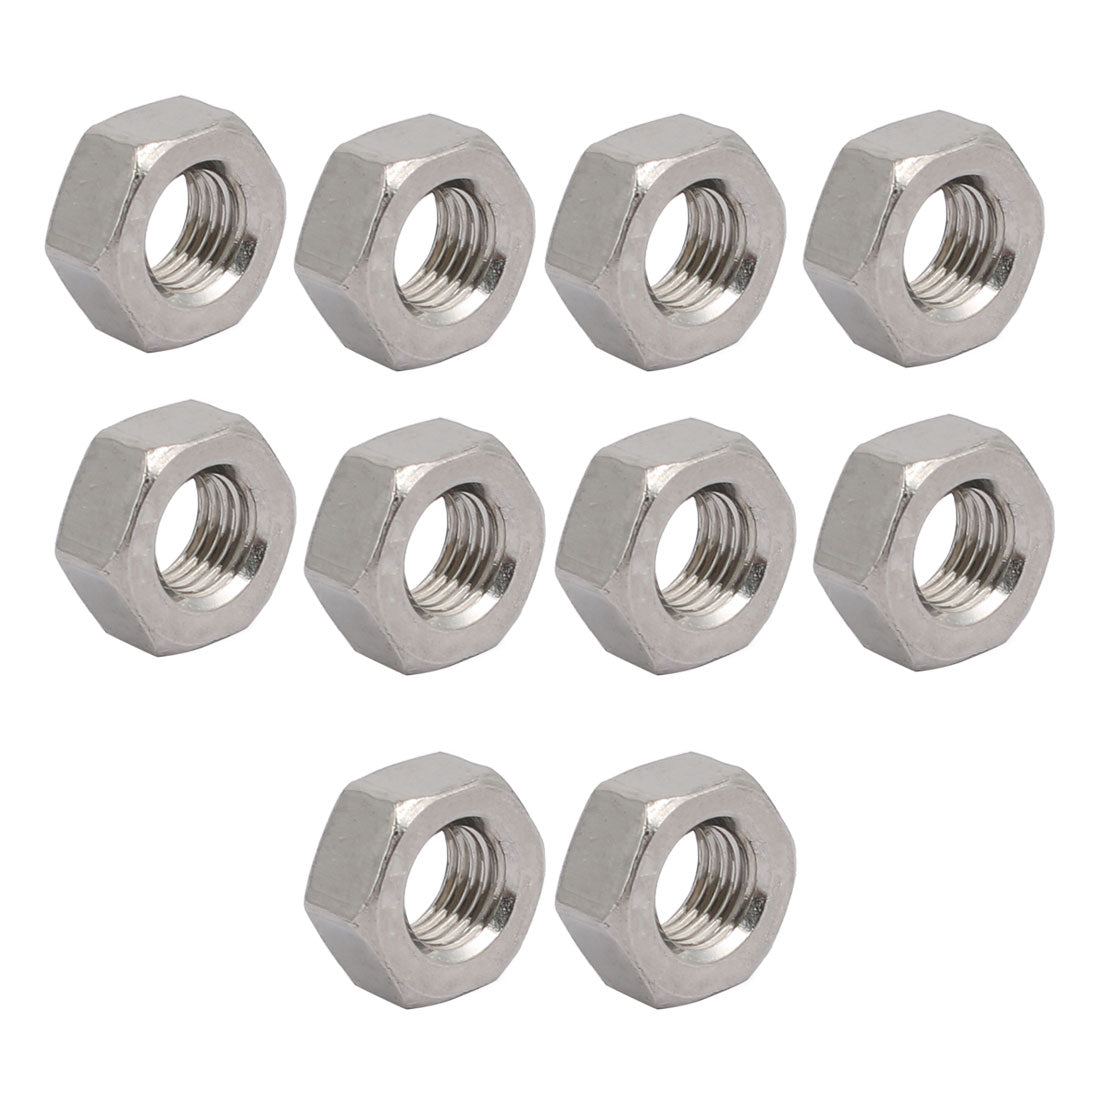 uxcell Uxcell 10pcs M6 x 0.75mm Pitch Metric Fine Thread 304 Stainless Steel Hex Nuts